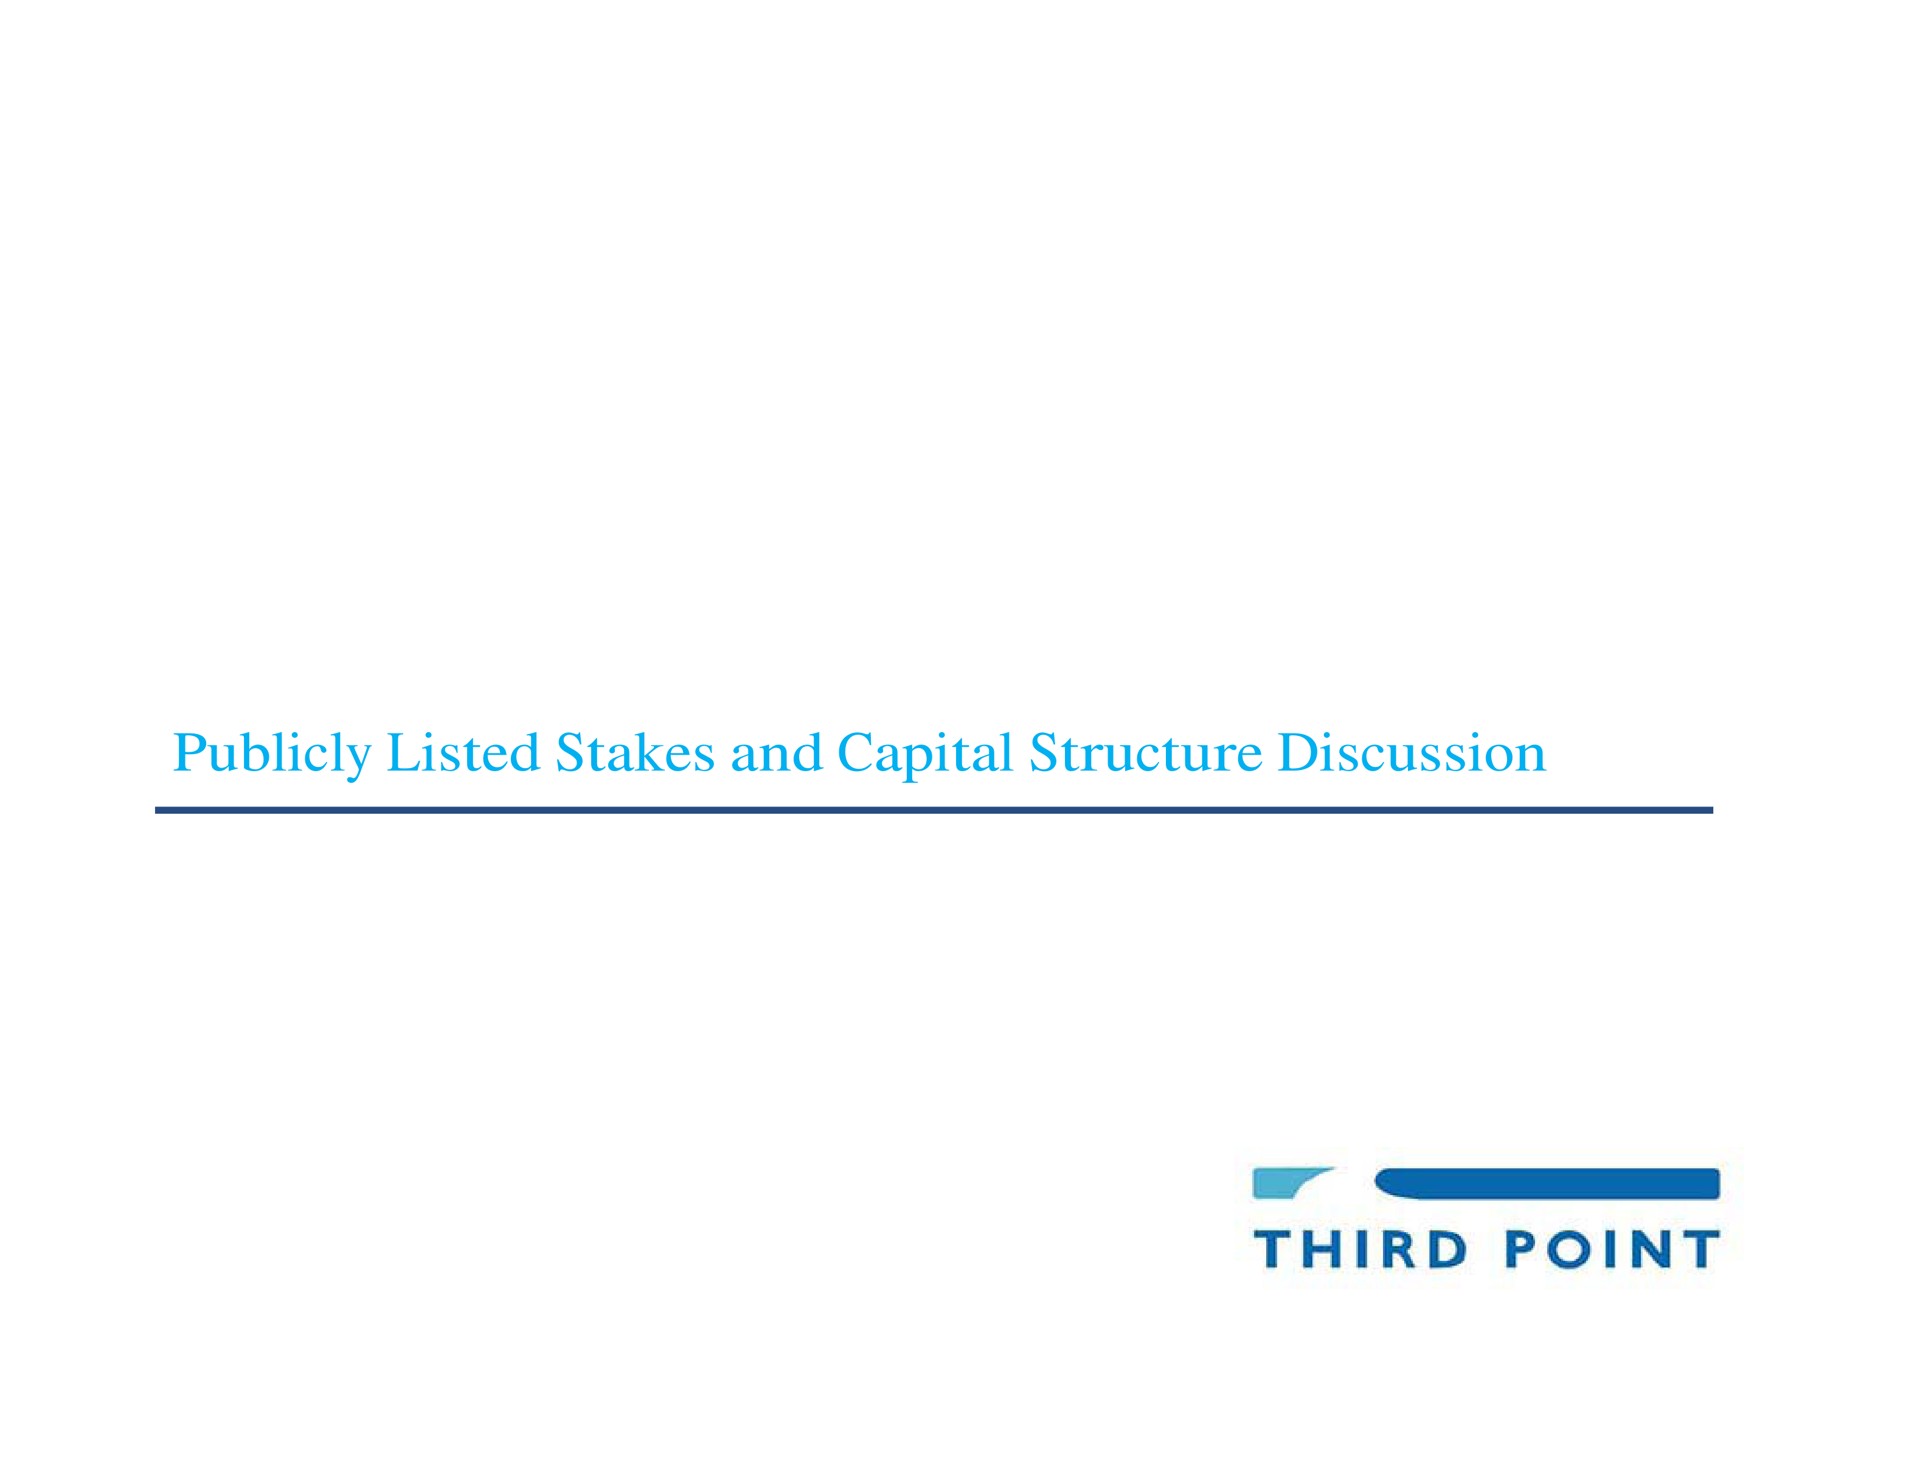 publicly listed stakes and capital structure discussion third point | Third Point Management